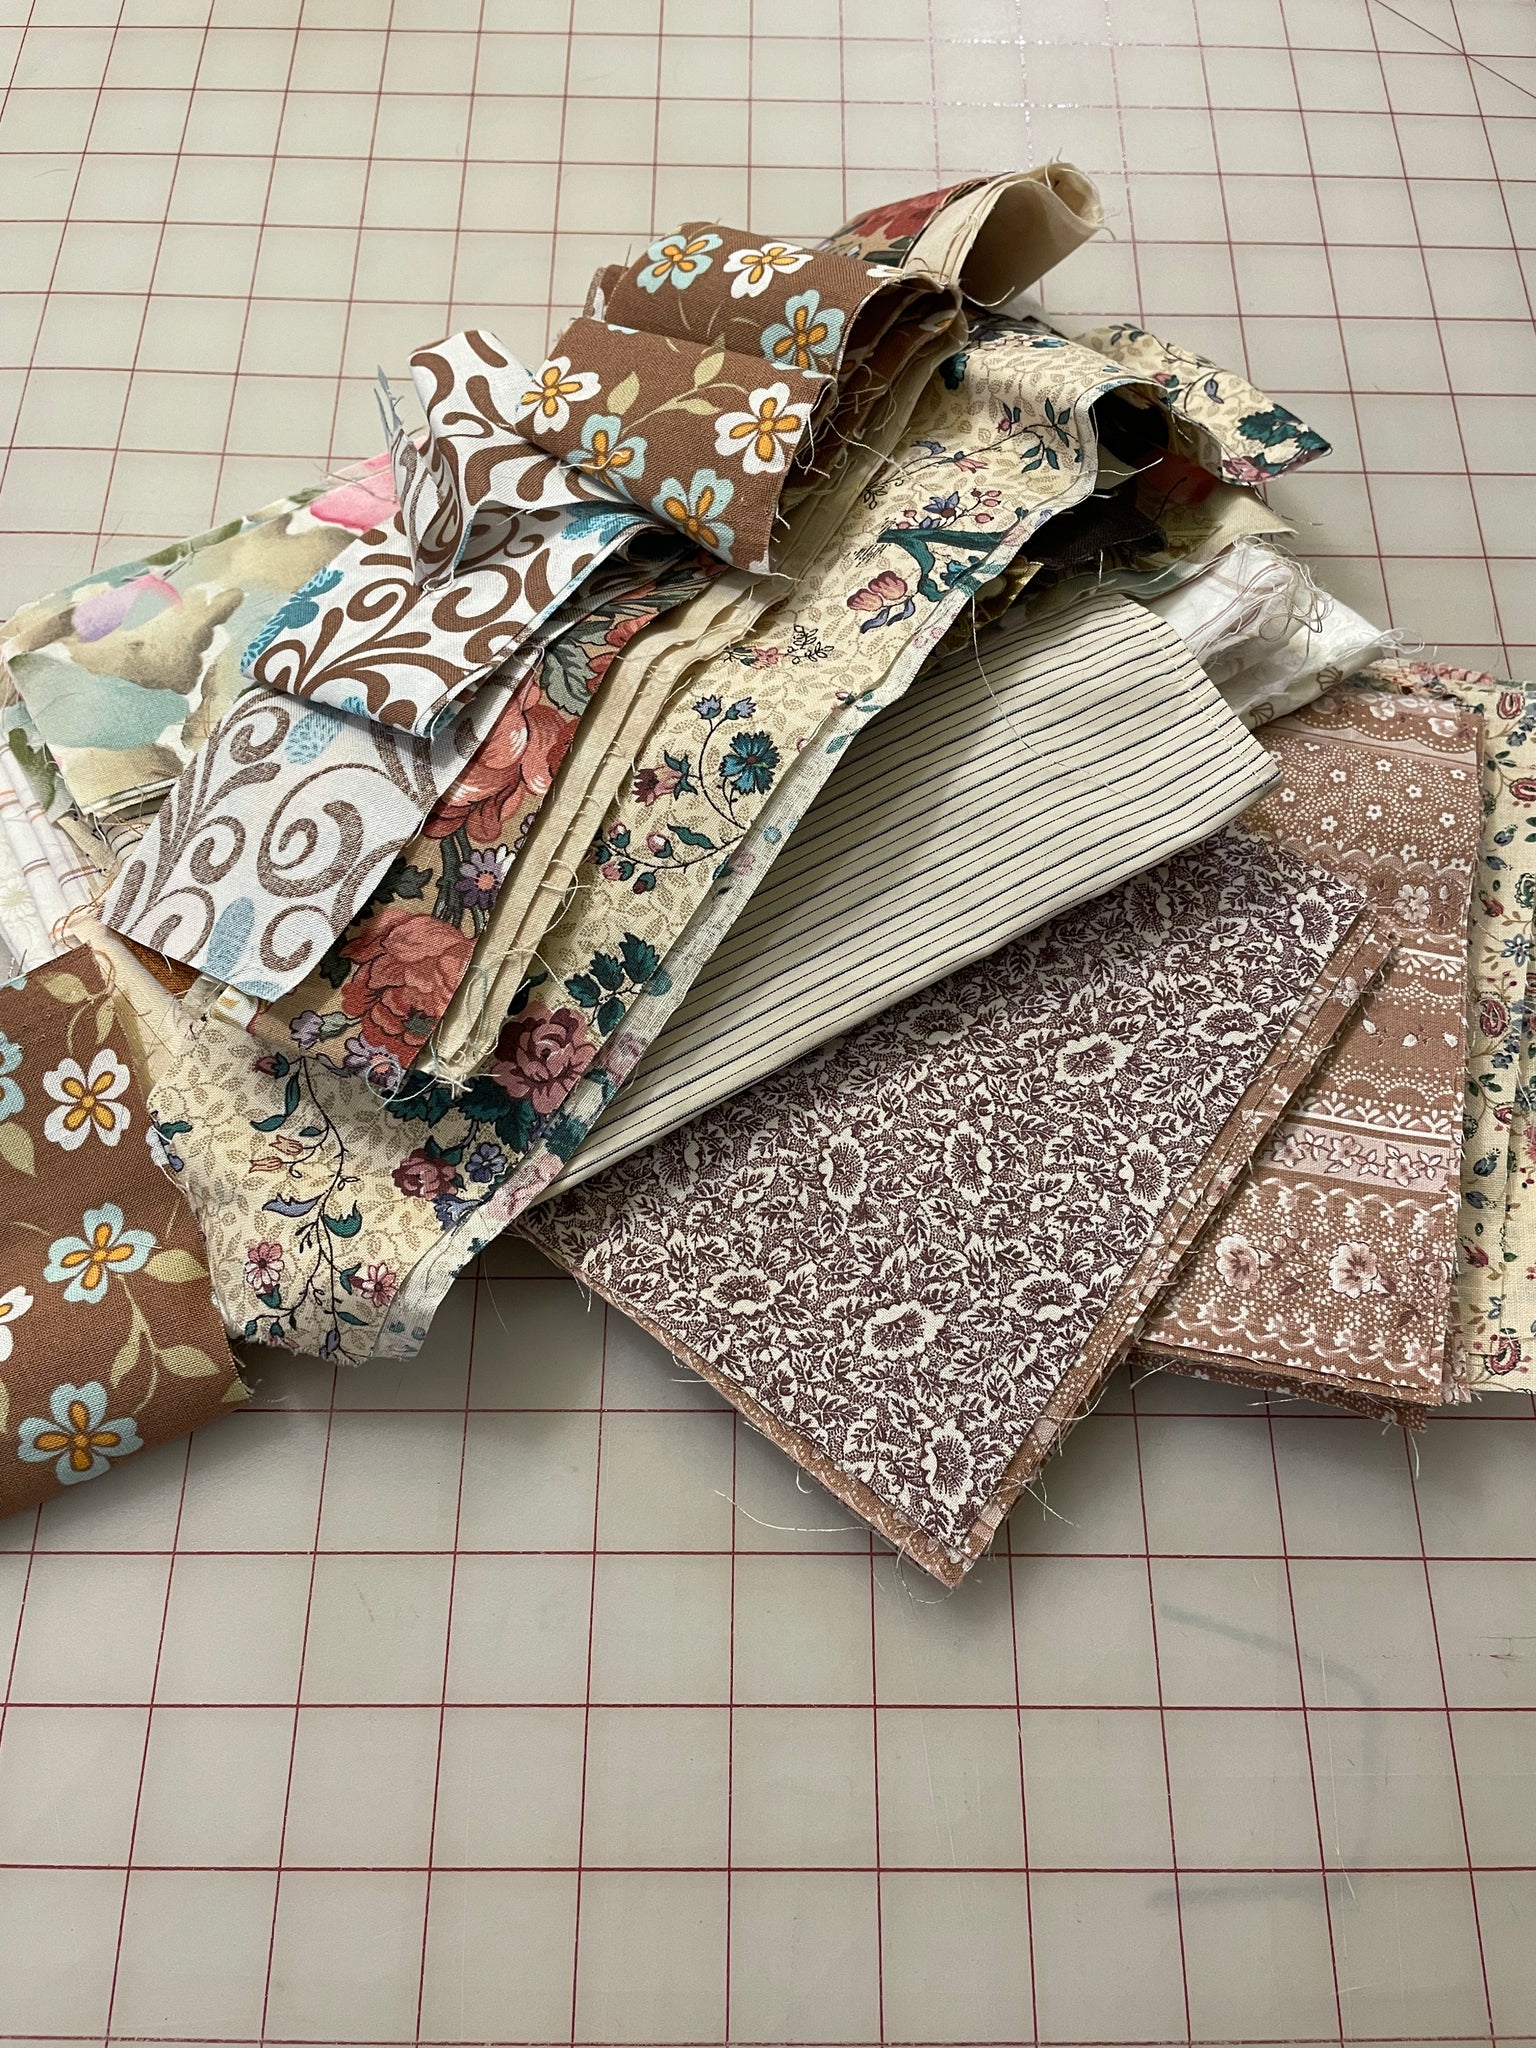 Quilting Cotton Mystery Scrap Remnant Bundle - Beiges and Tans 1 POUND